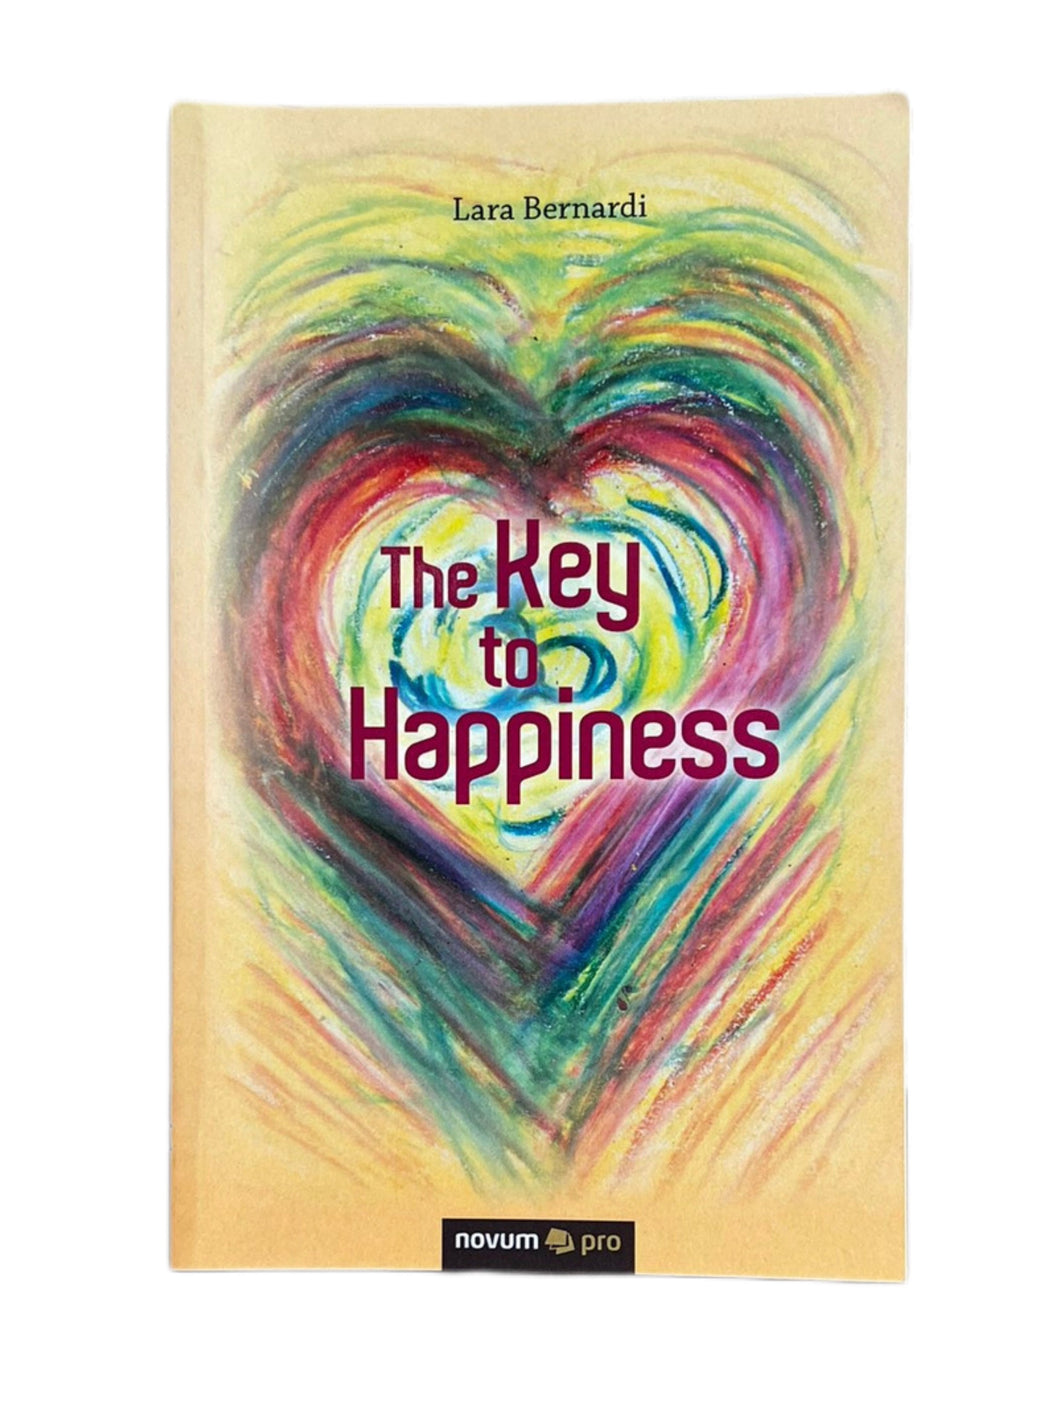 Book The Key to Happiness - Self Growth and be Happy Book by Lara Bernardi